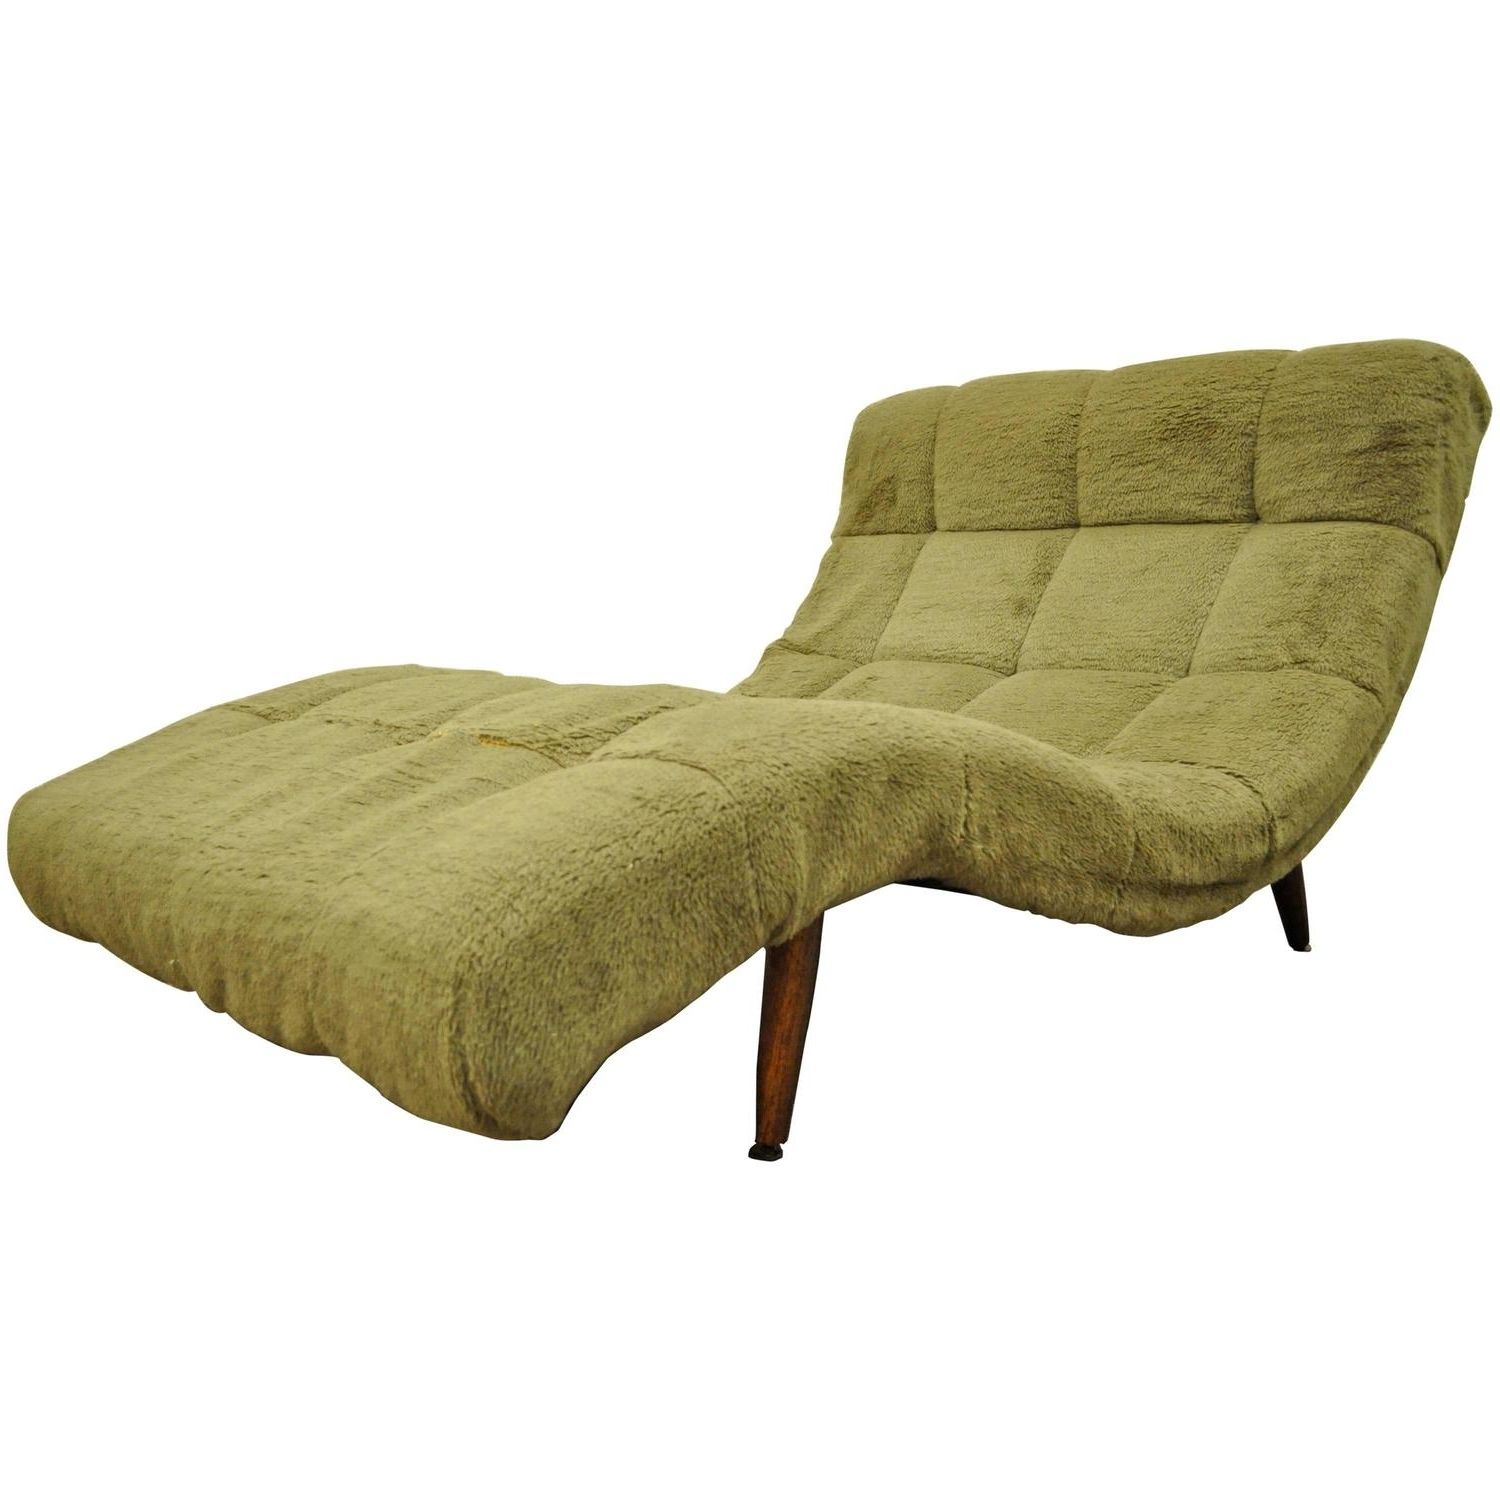 Midcentury Modern Double Wide Wave Chaise Lounge In The Style Of In Newest Modern Chaise Lounges (View 10 of 15)